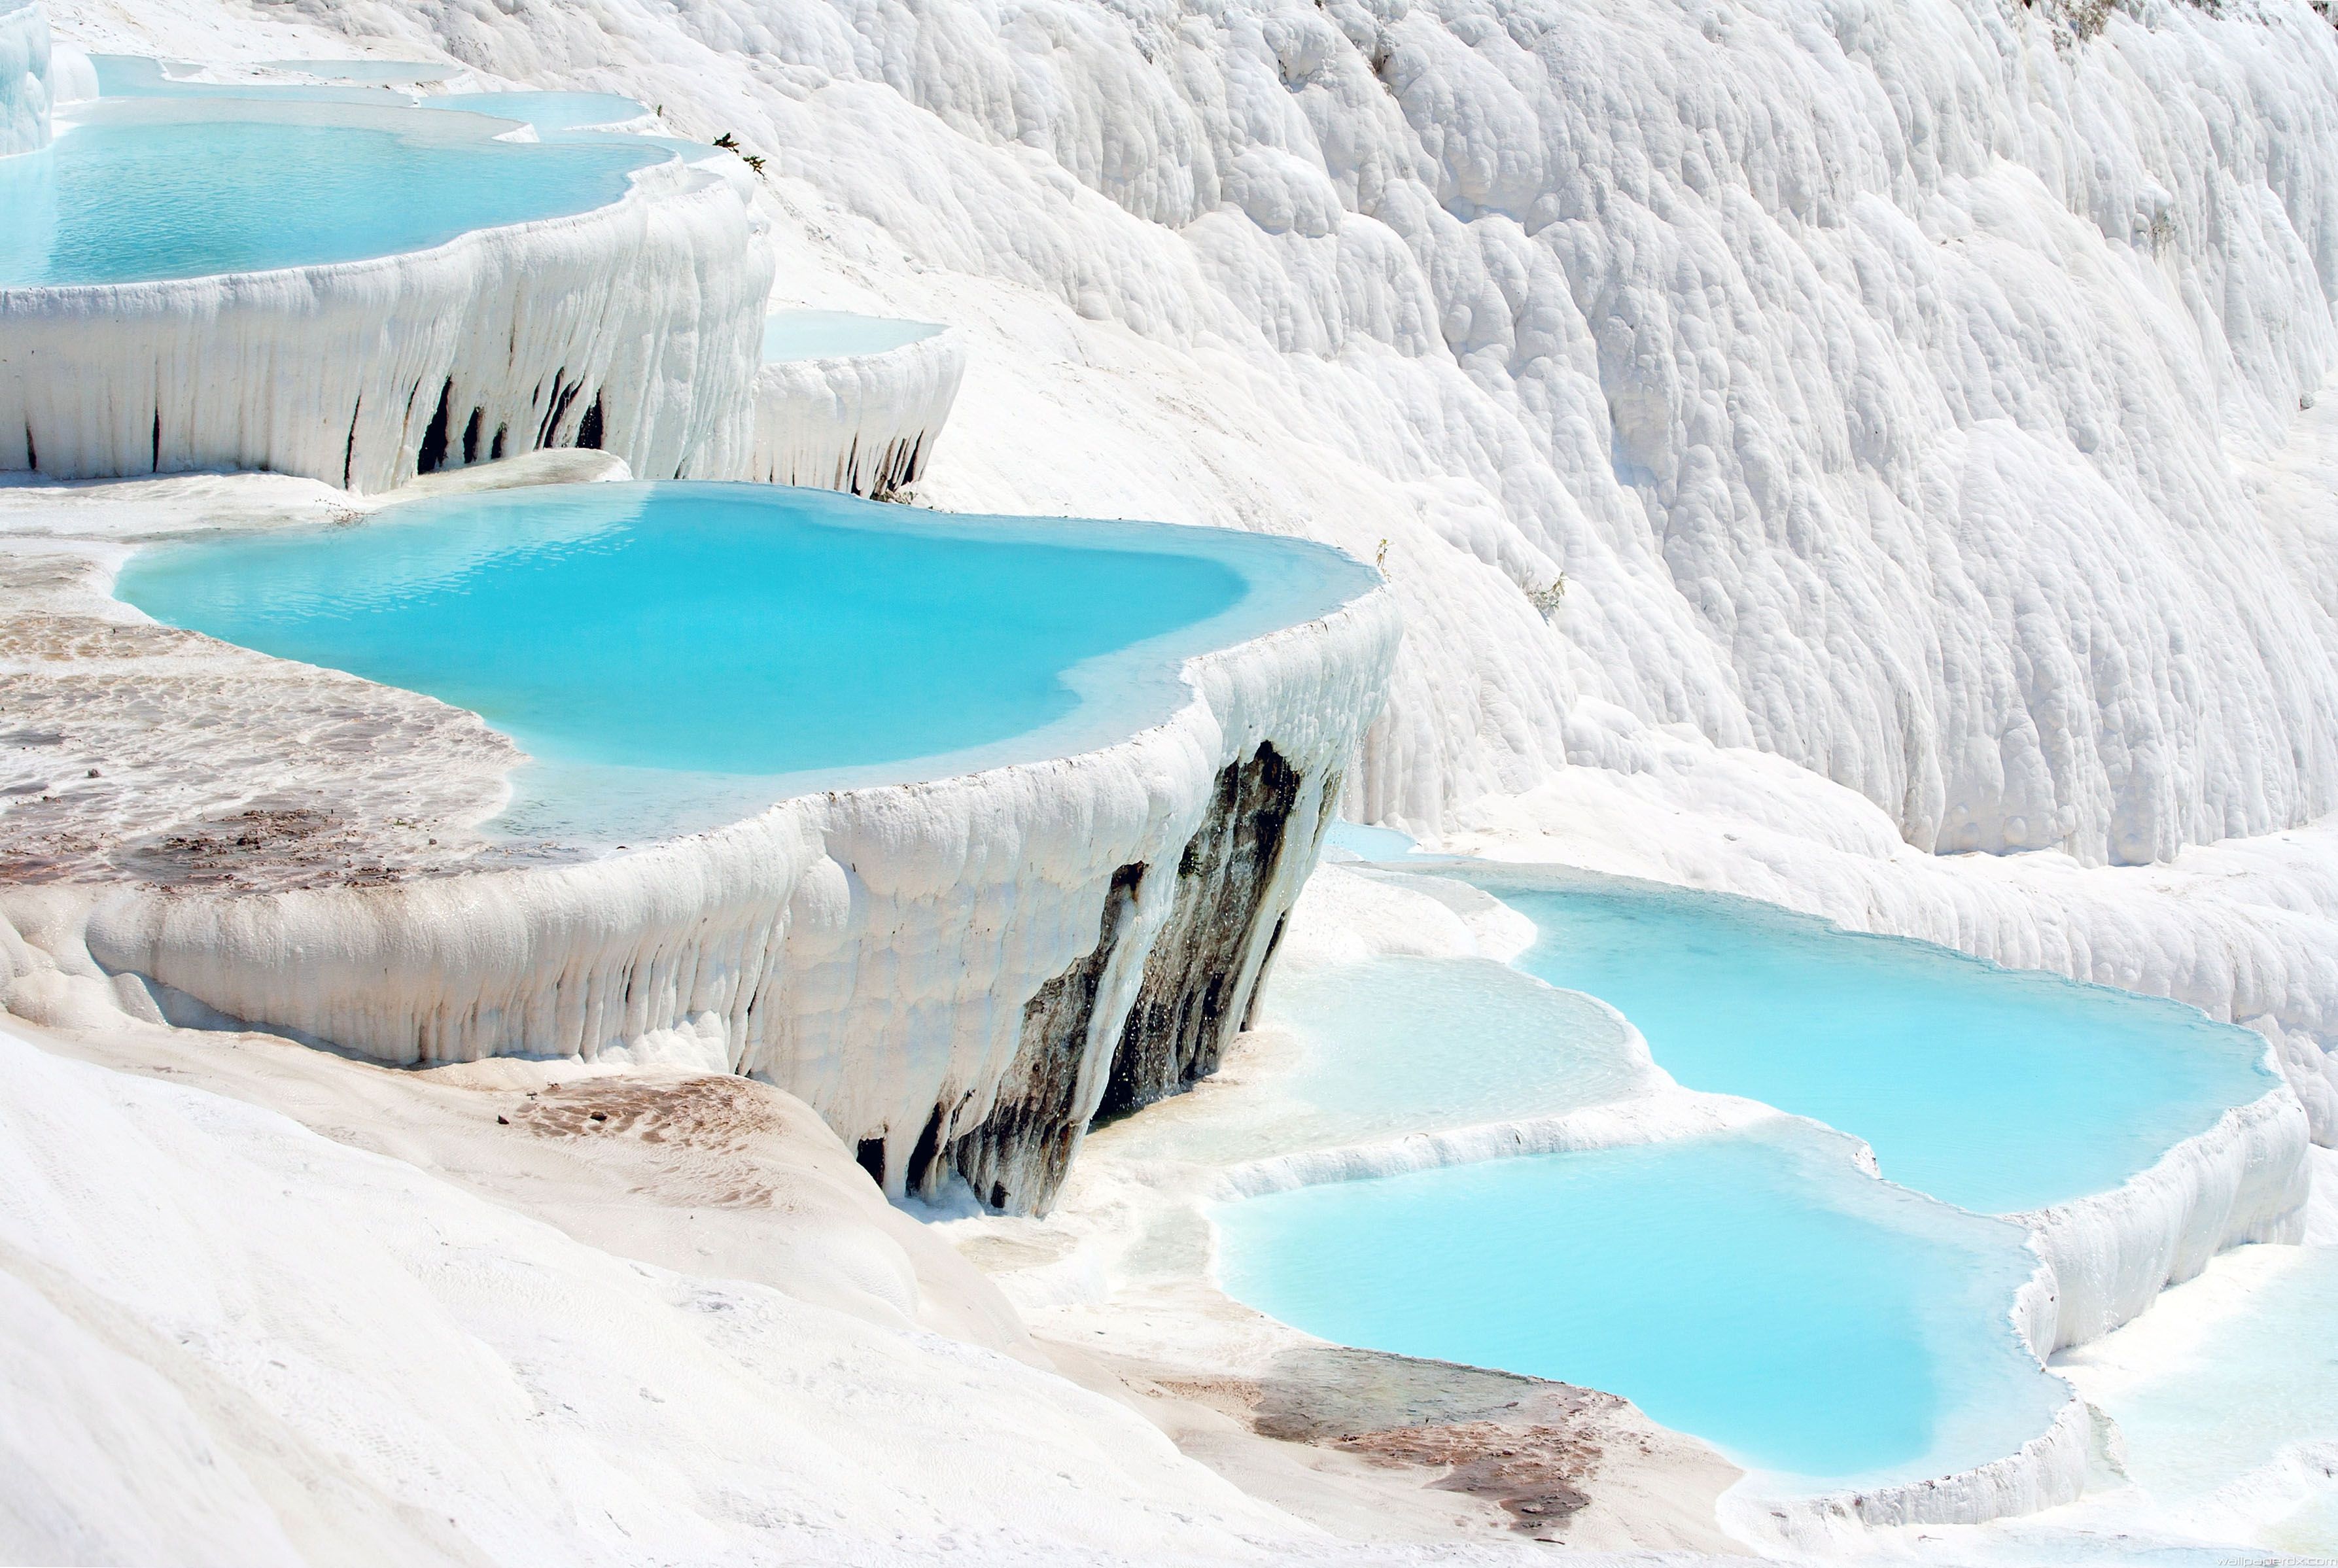 Pamukkale Wallpaper Image Photo Picture Background